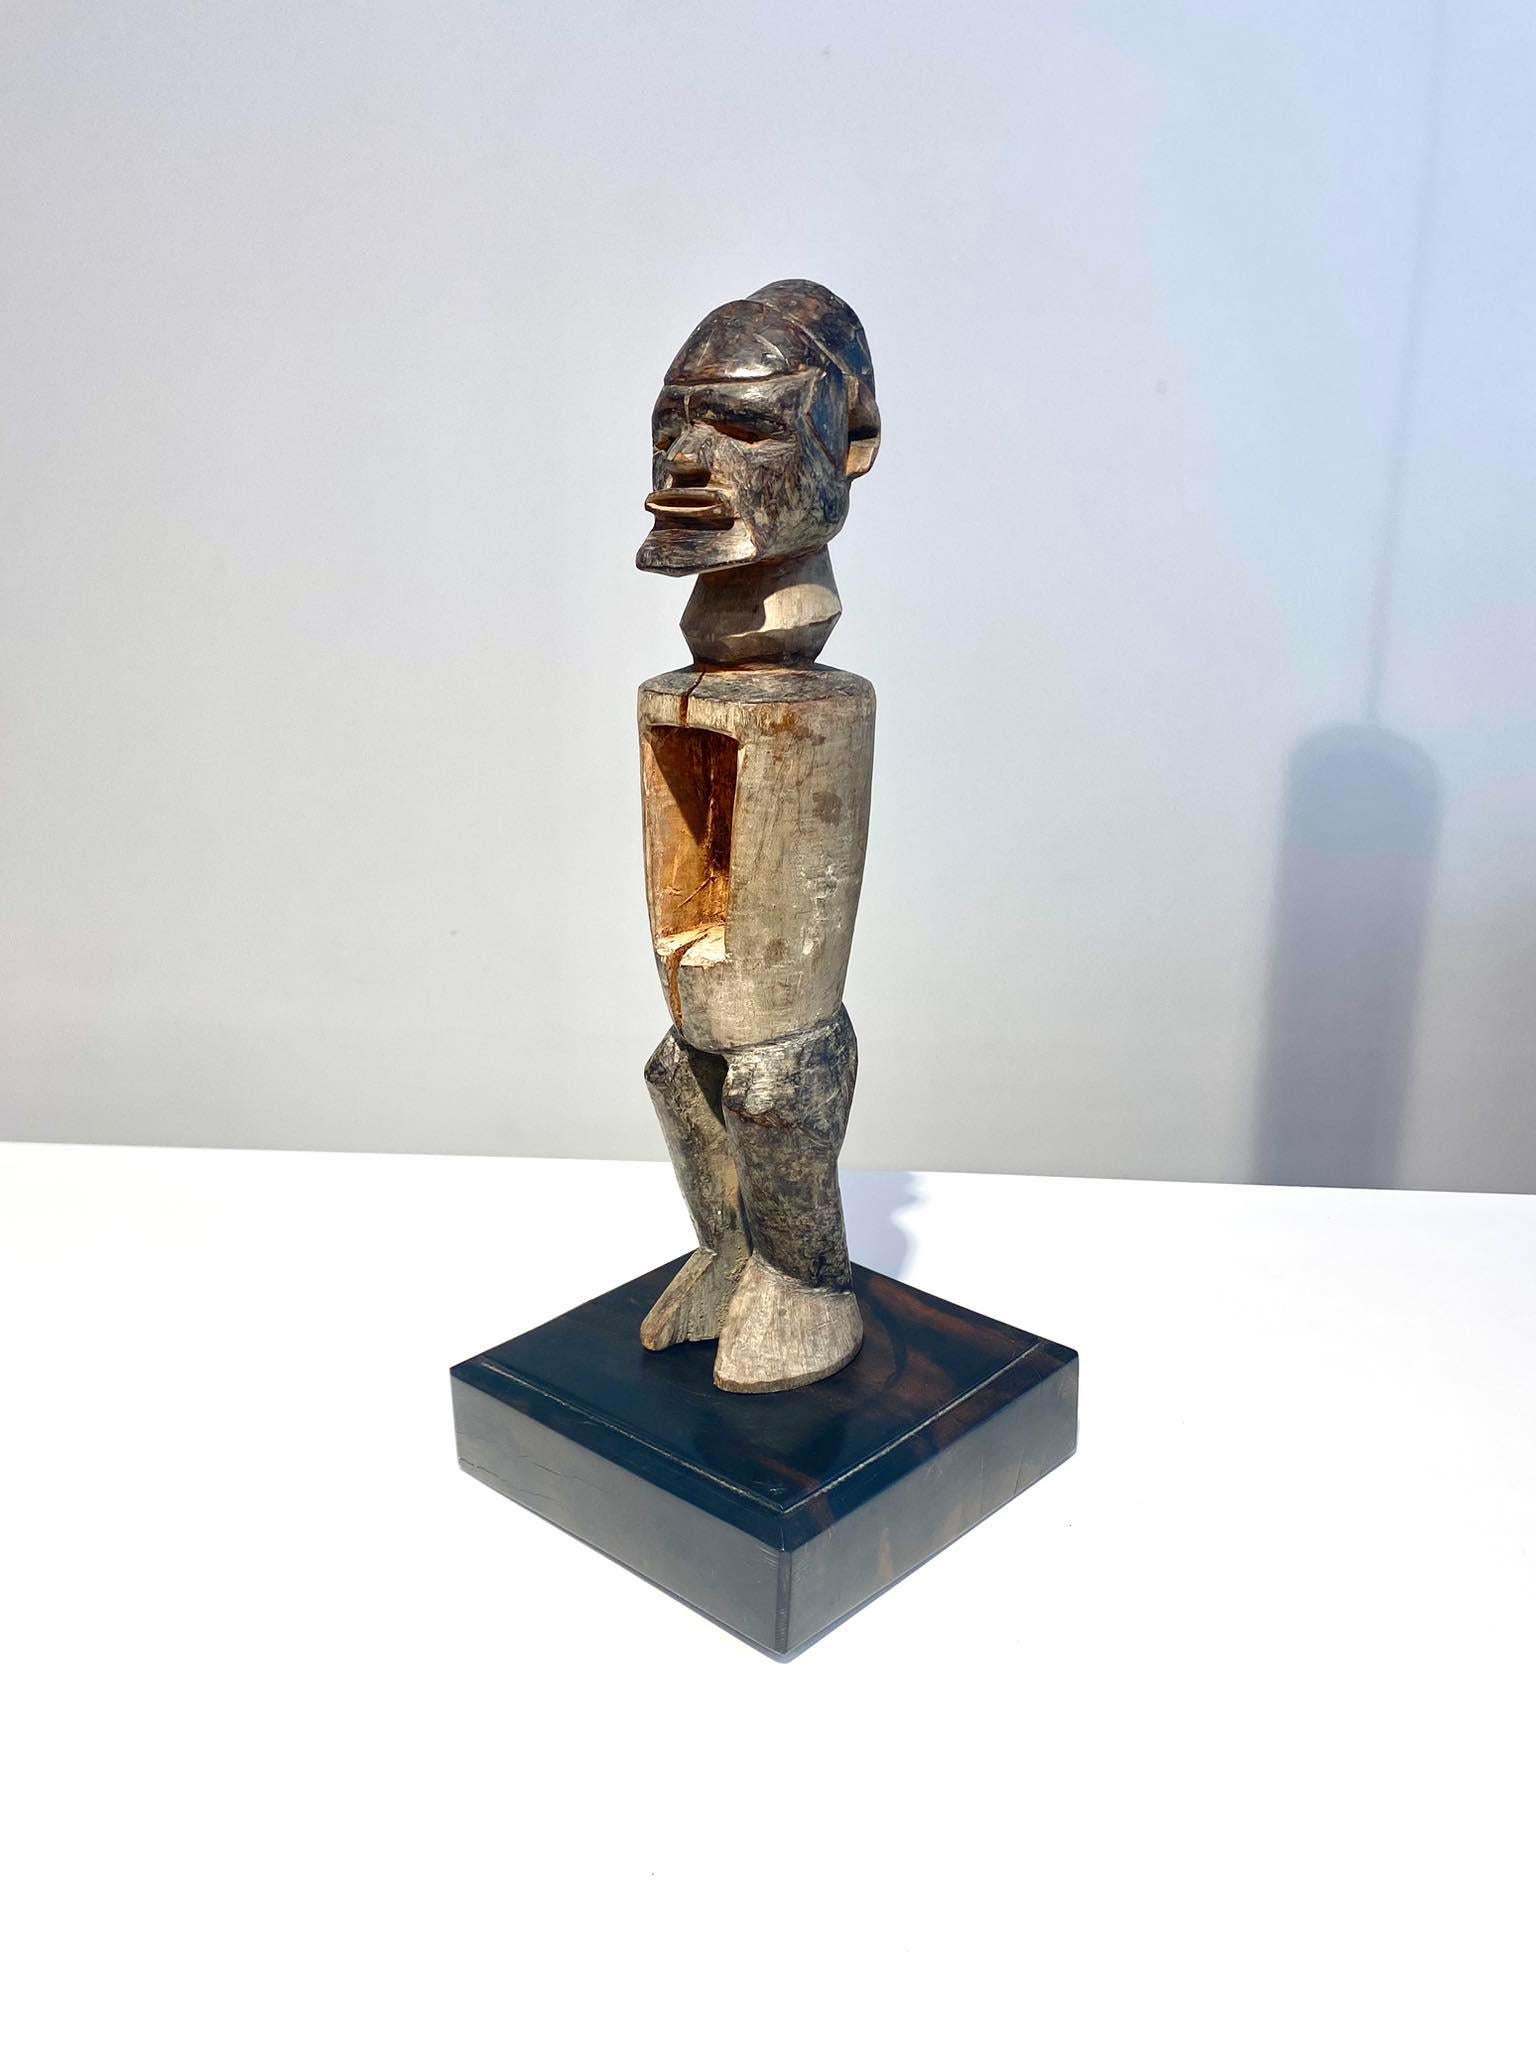 Hardwood Statue Of The Teke Tribe DR Congo African Art Early 20th Malebo Pool Brazzaville For Sale